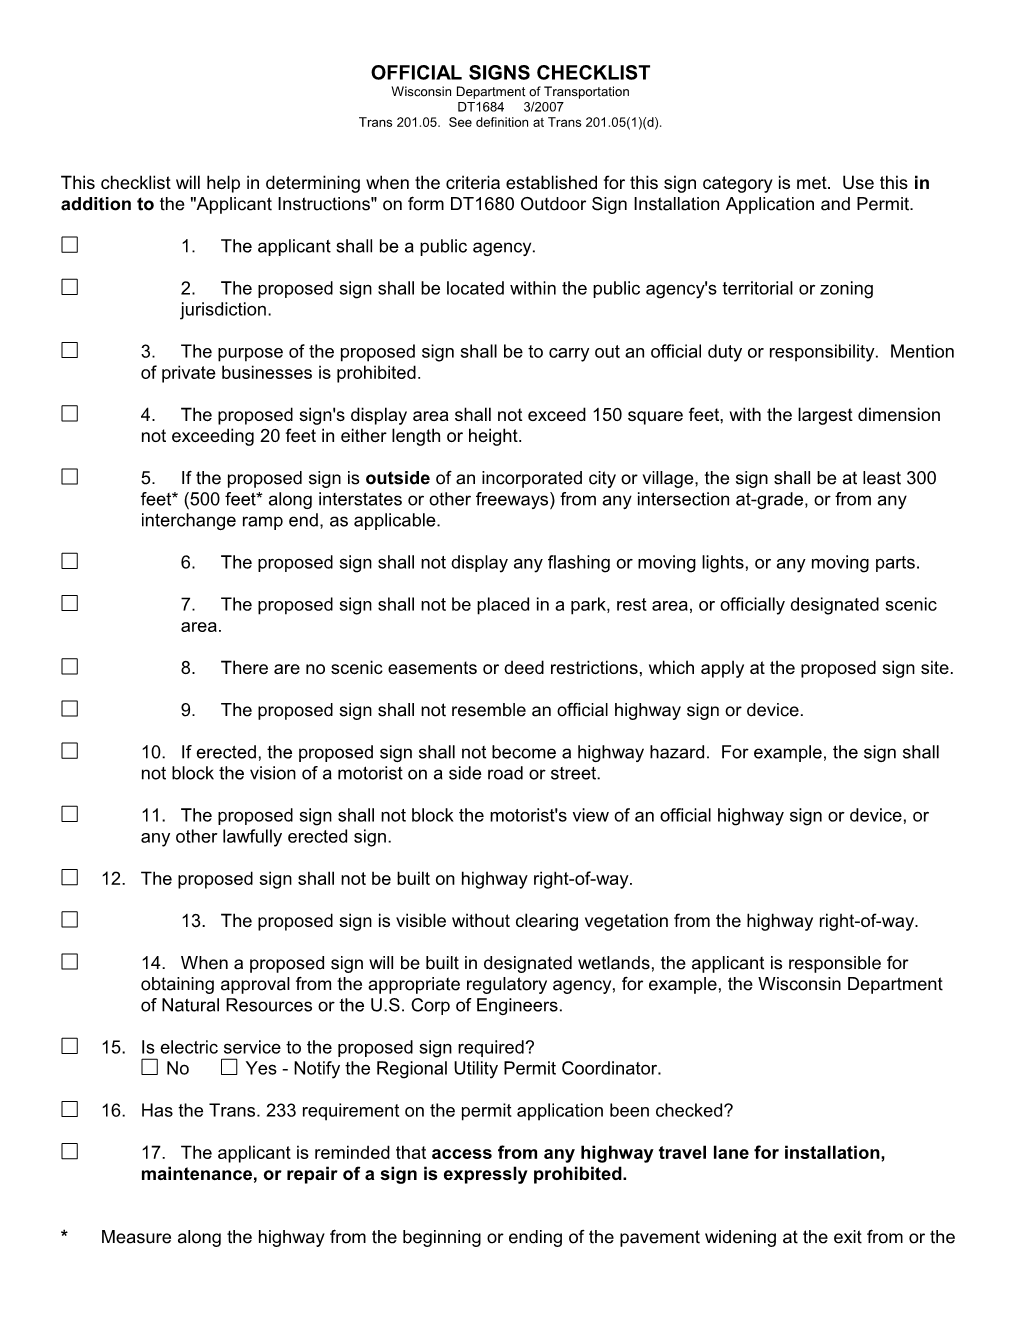 DT1684 Official Signs Checklist (Sign Permit)